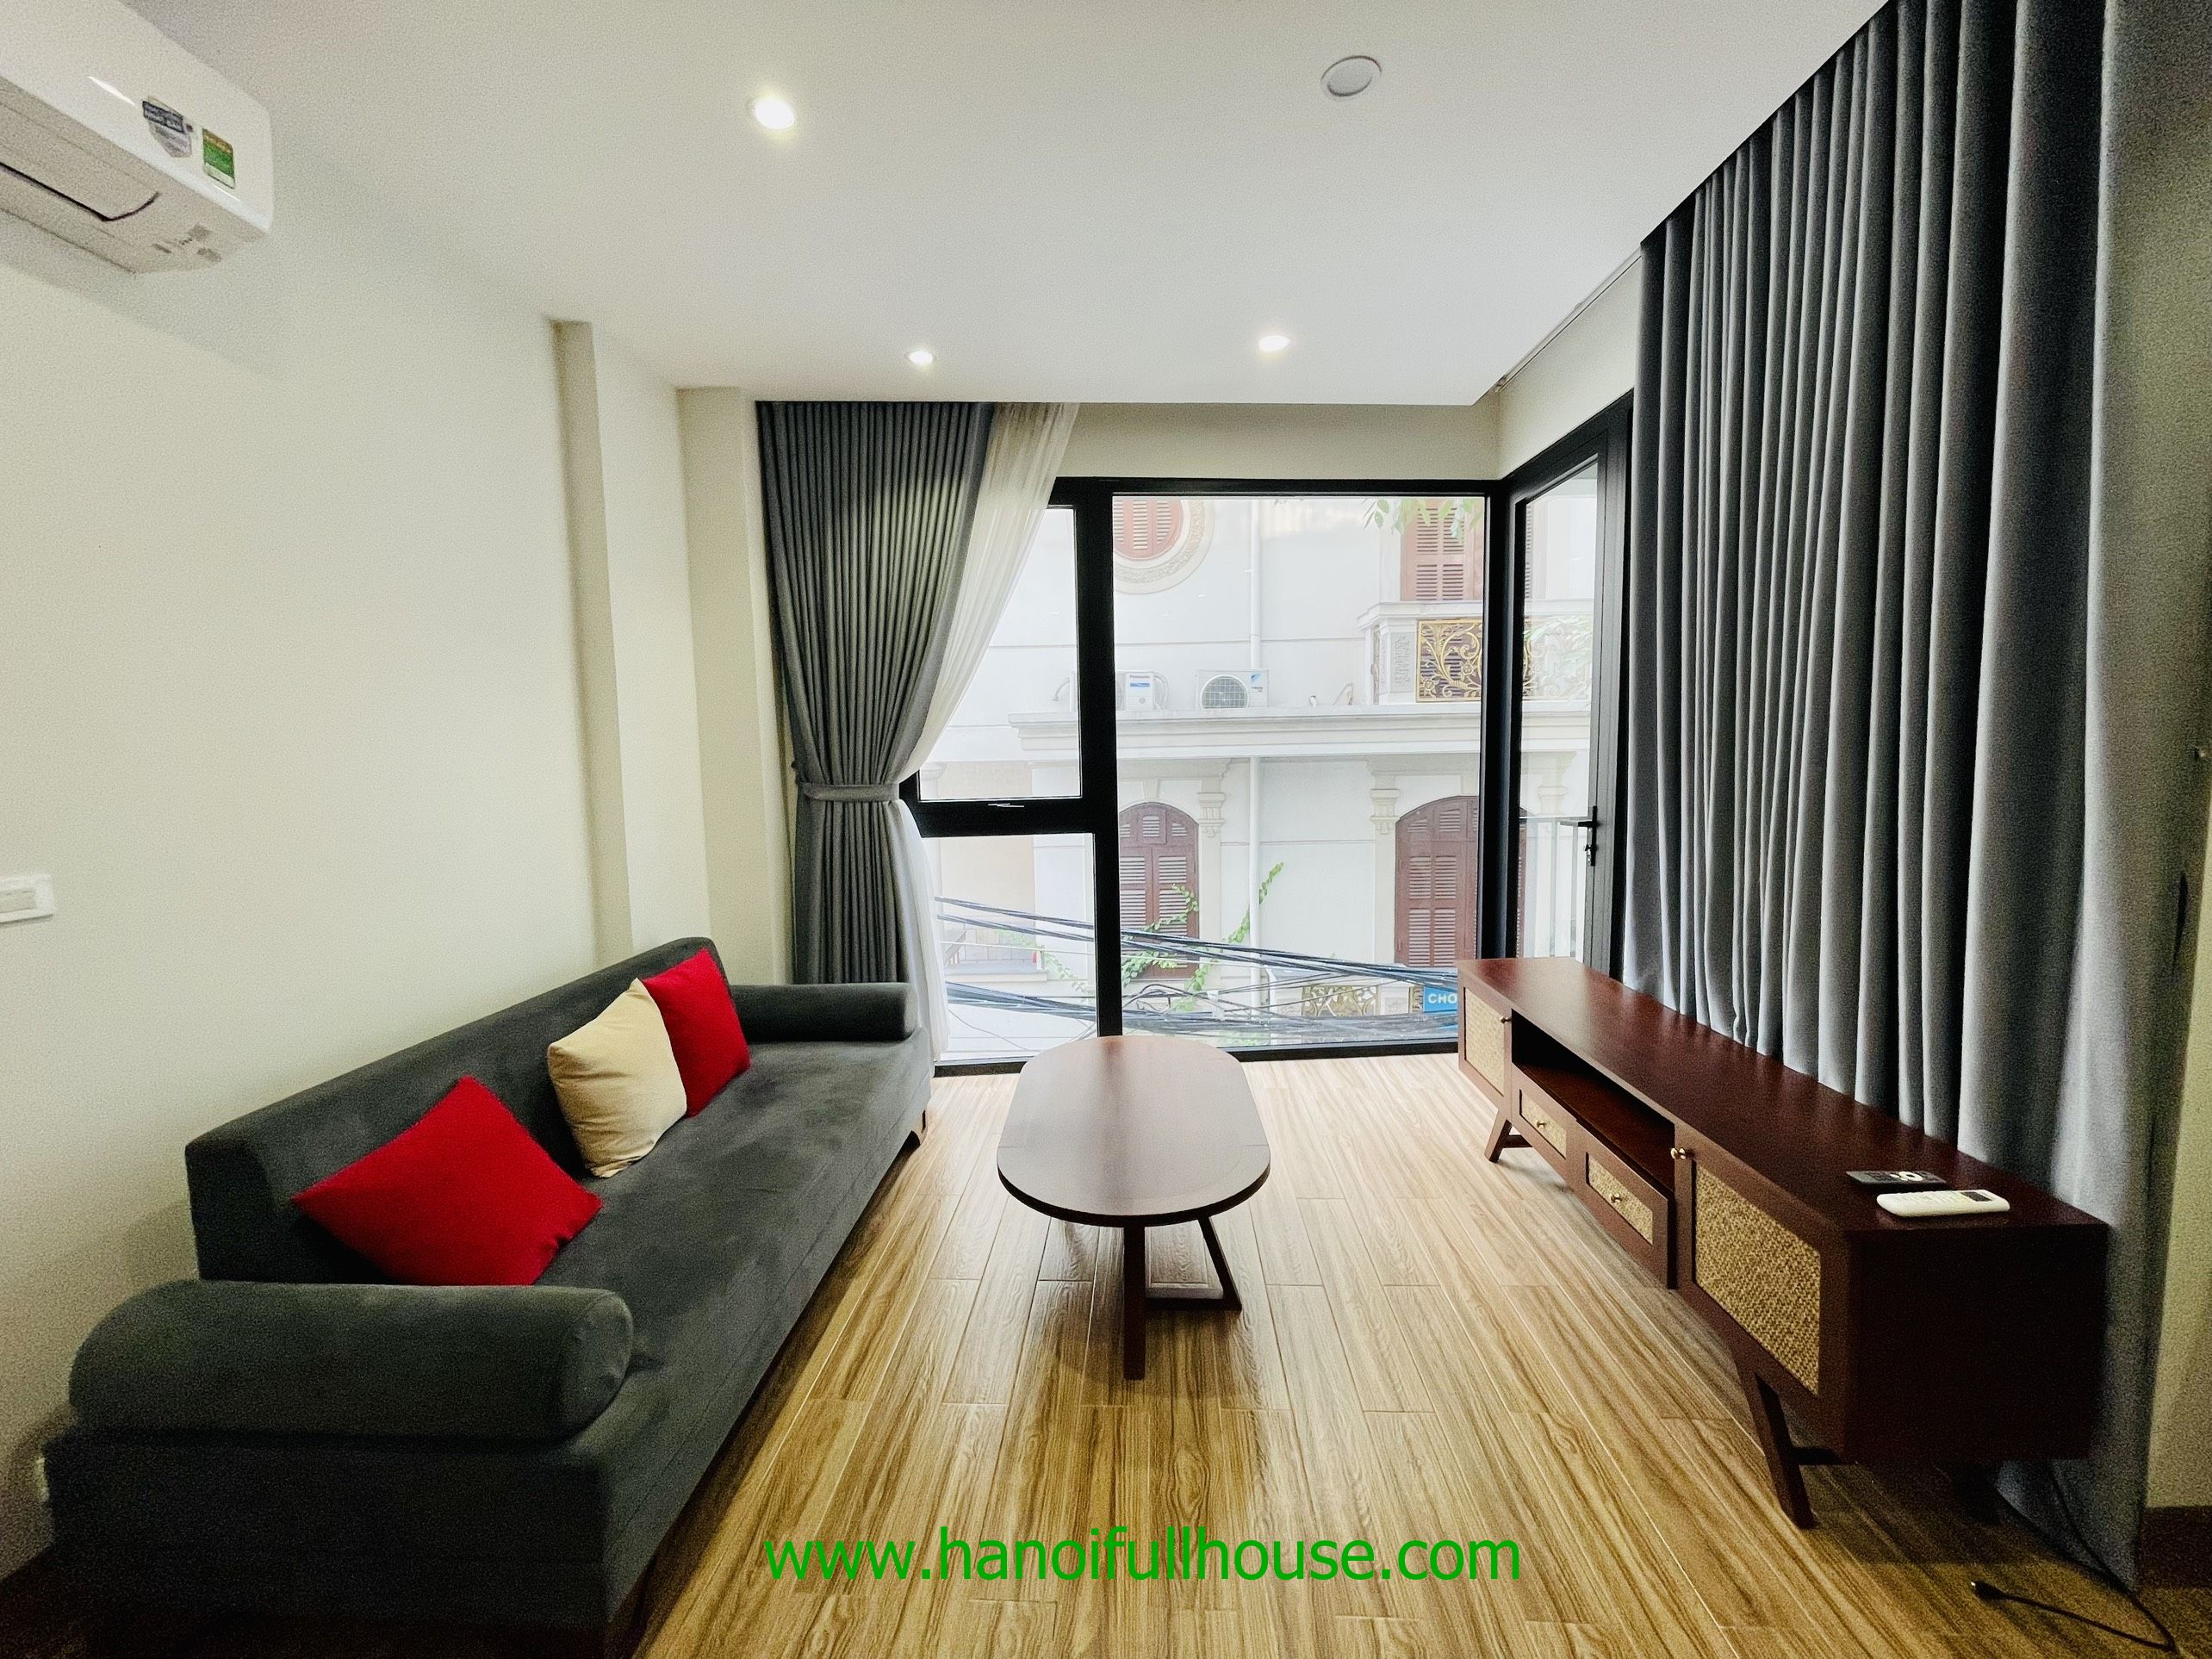 Modern apartment with 2 bedrooms, 2 bathrooms in Tây Ho dist